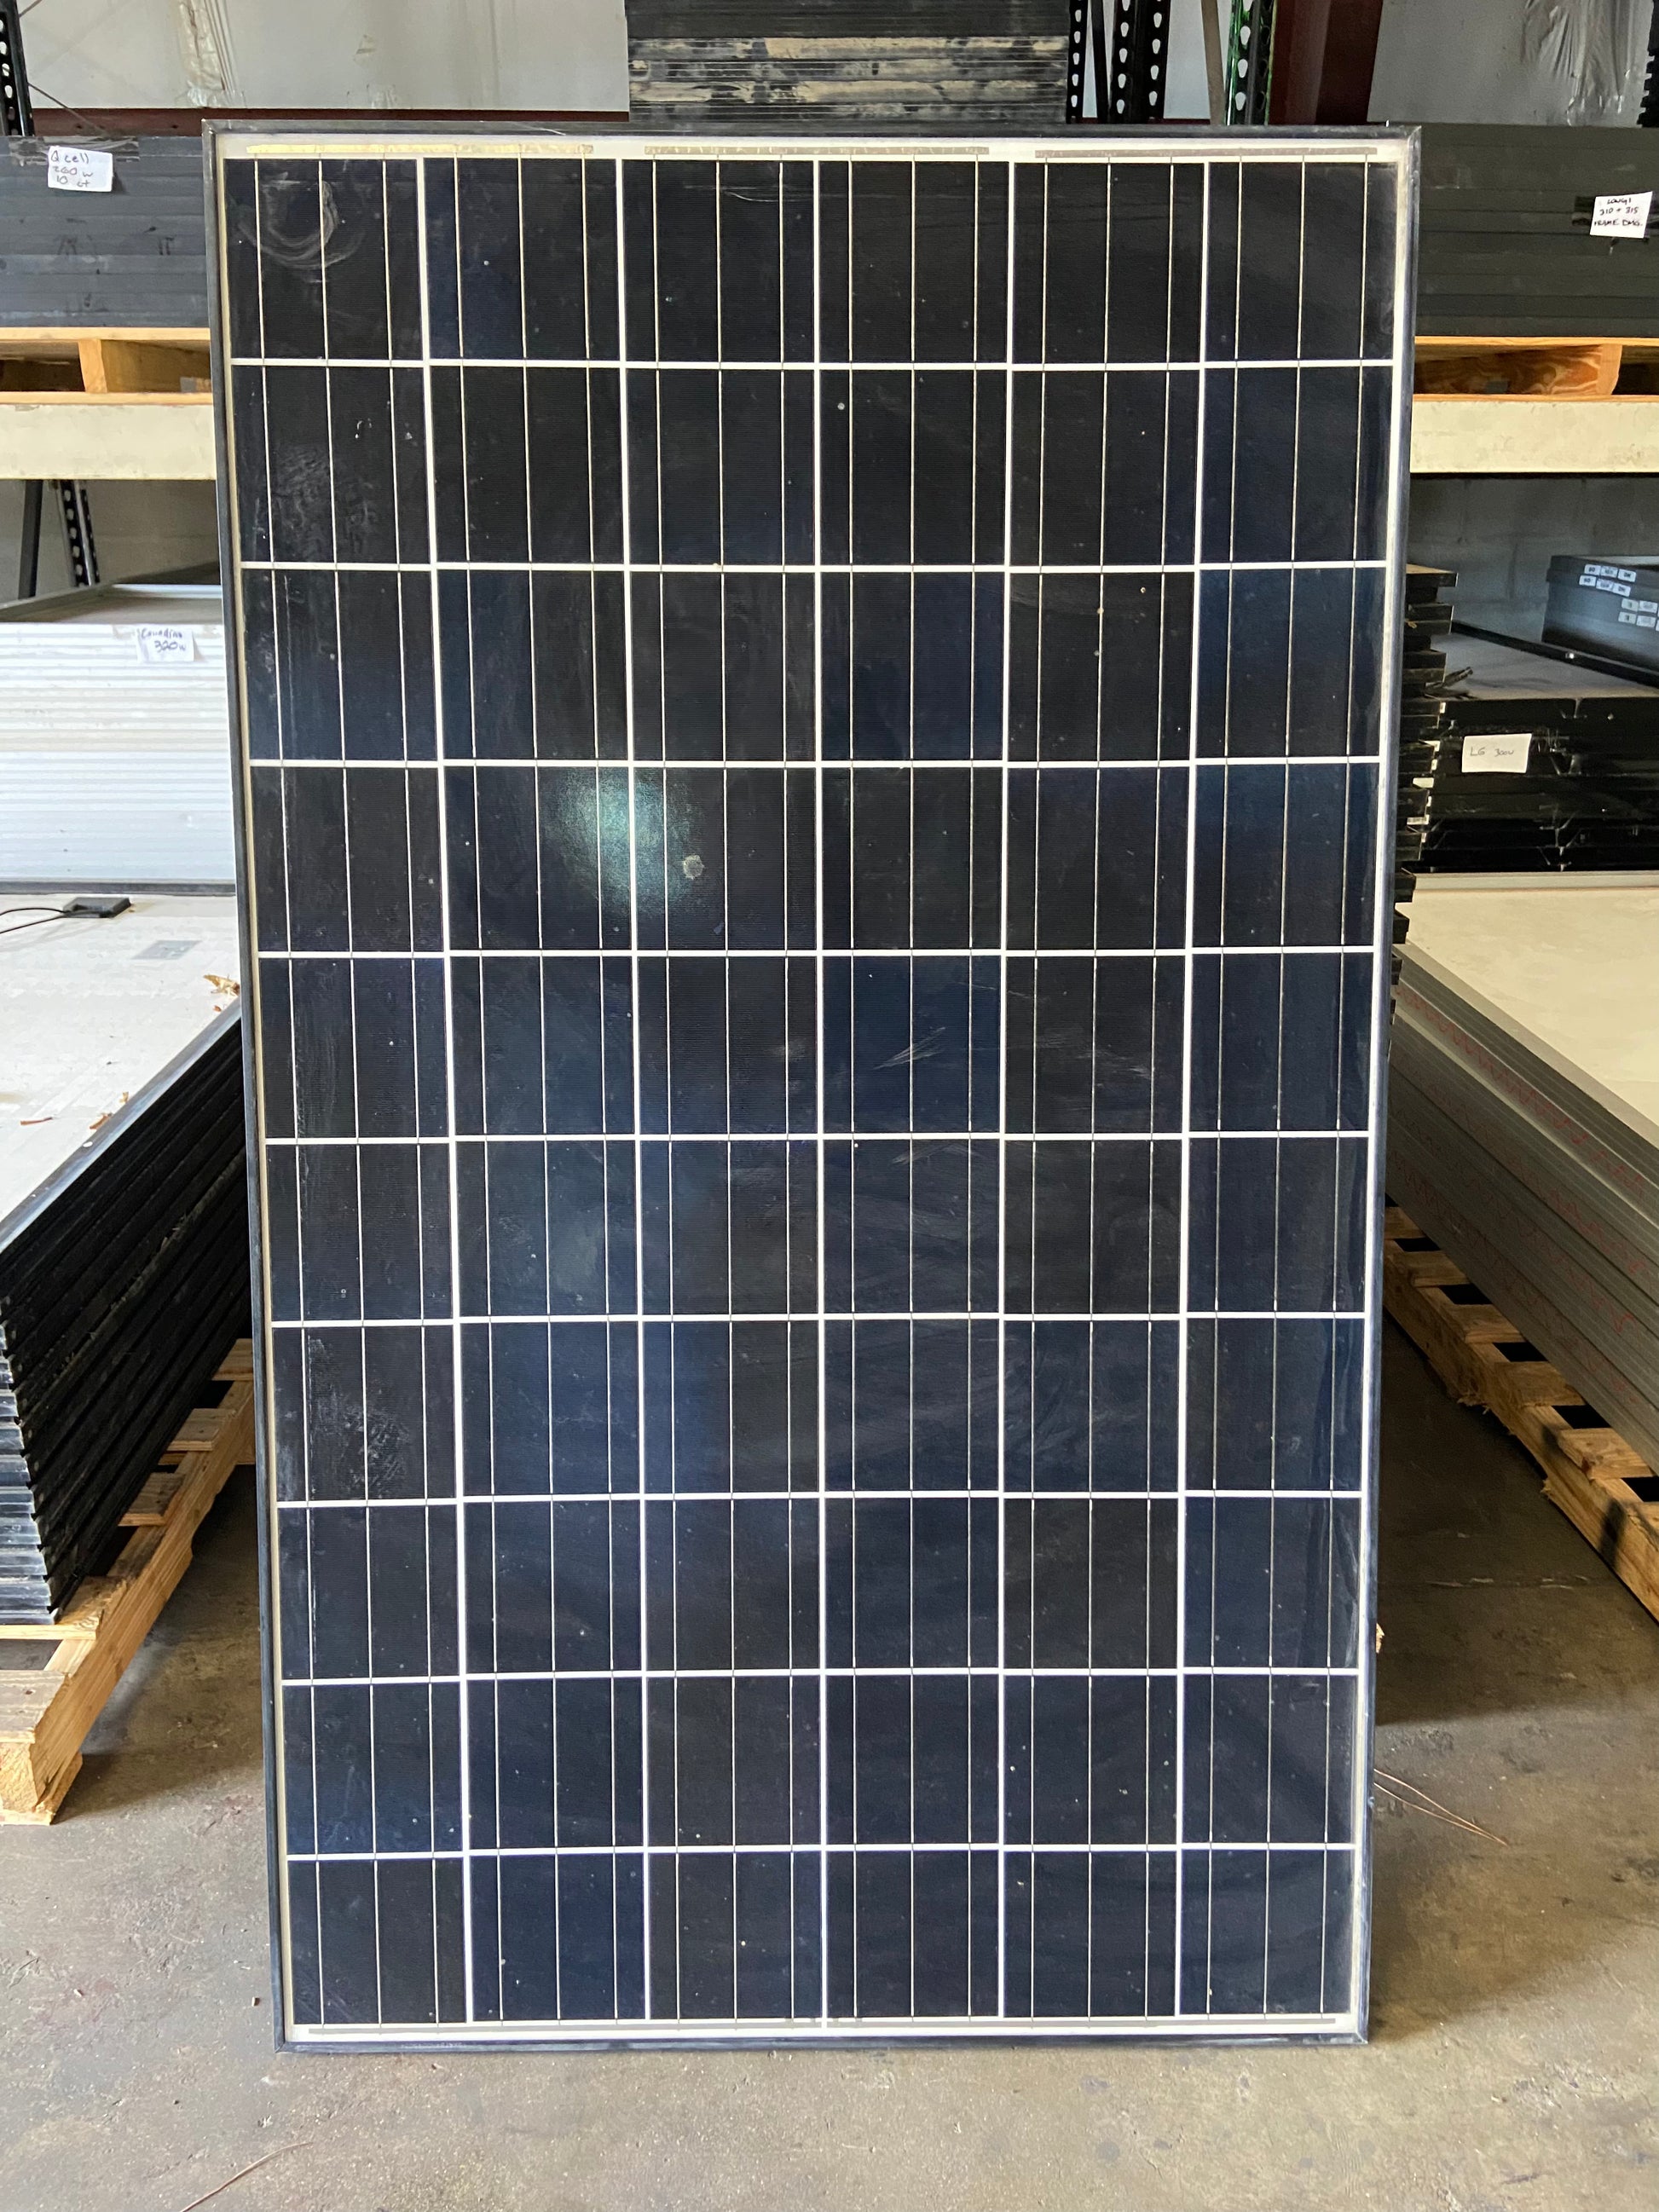 refurbished solar panel module for sale - 265 watt Kyocera Used Solar Panels - front of panel - Clear Energy Partners